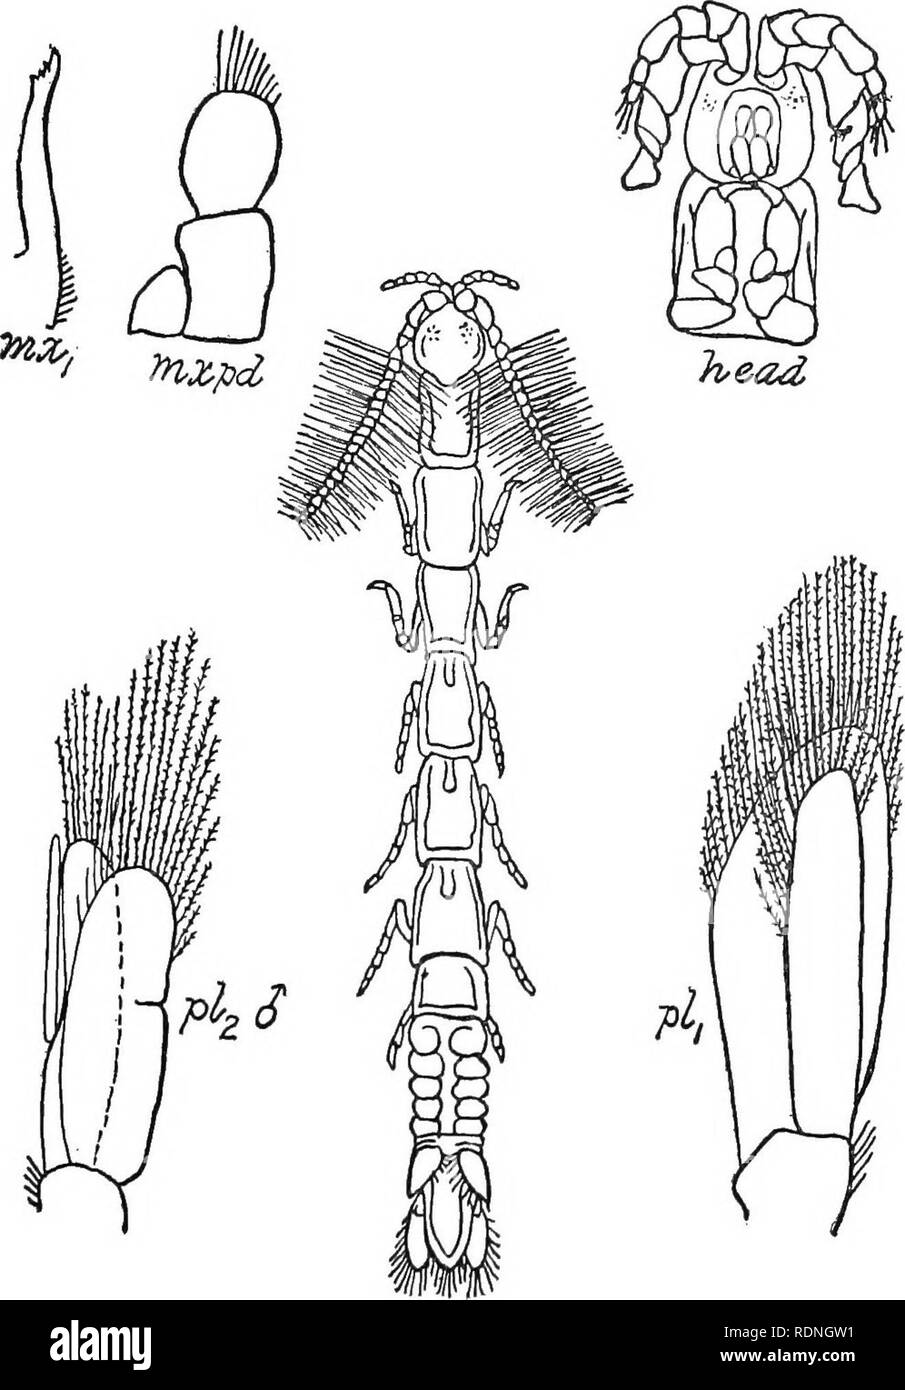 . The Arthrostraca of Connecticut. Malacostraca. No. 26.] ARTHROSTRACA OF CONNECTICUT. 201. FiQ. 59- Ptilanthura tenuis. First antennse in the female shorter than second pair with a very short flagellum consisting of a small basal segment and a minute terminal one tipped with a few sets; first joint of peduncle long; second and third subequal and slightly longer than first. In the male first pair of antennas as long as head and first two segments of thorax together; first segment large but not longer than second, which is also longer than the third; flagellum with first joint one-third as long Stock Photo